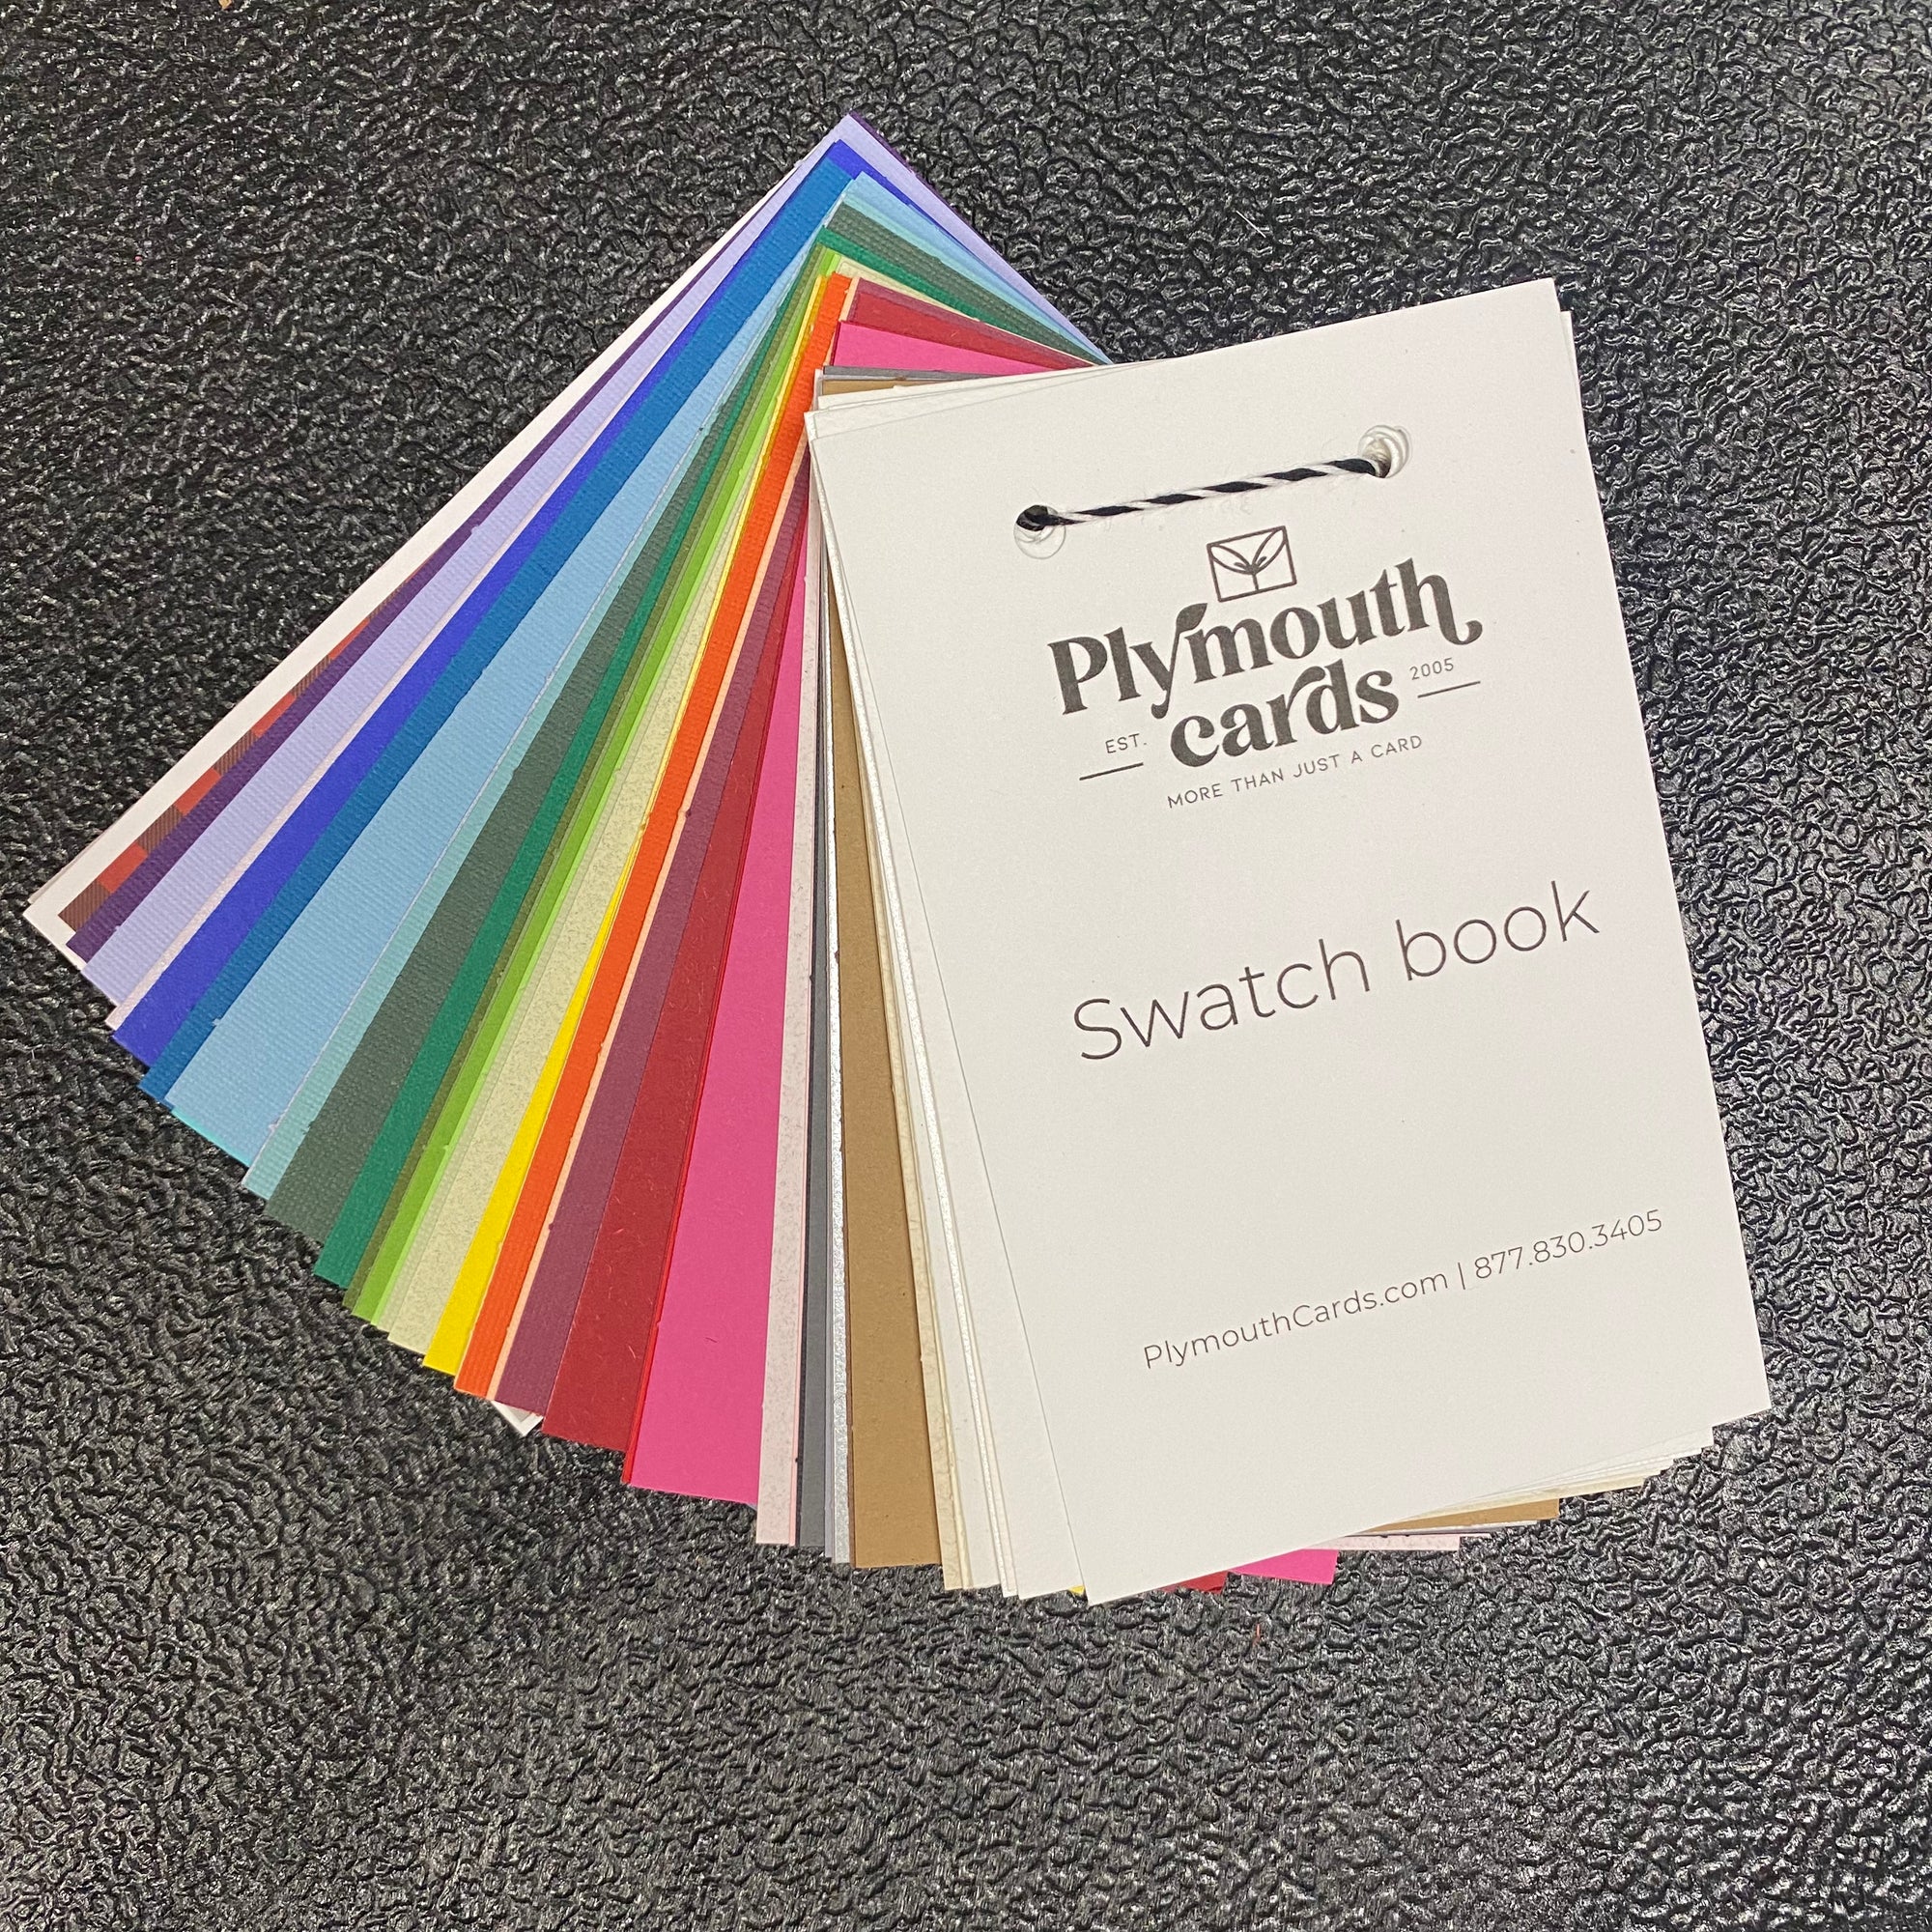 Swatch book-Photo note cards-Plymouth Cards